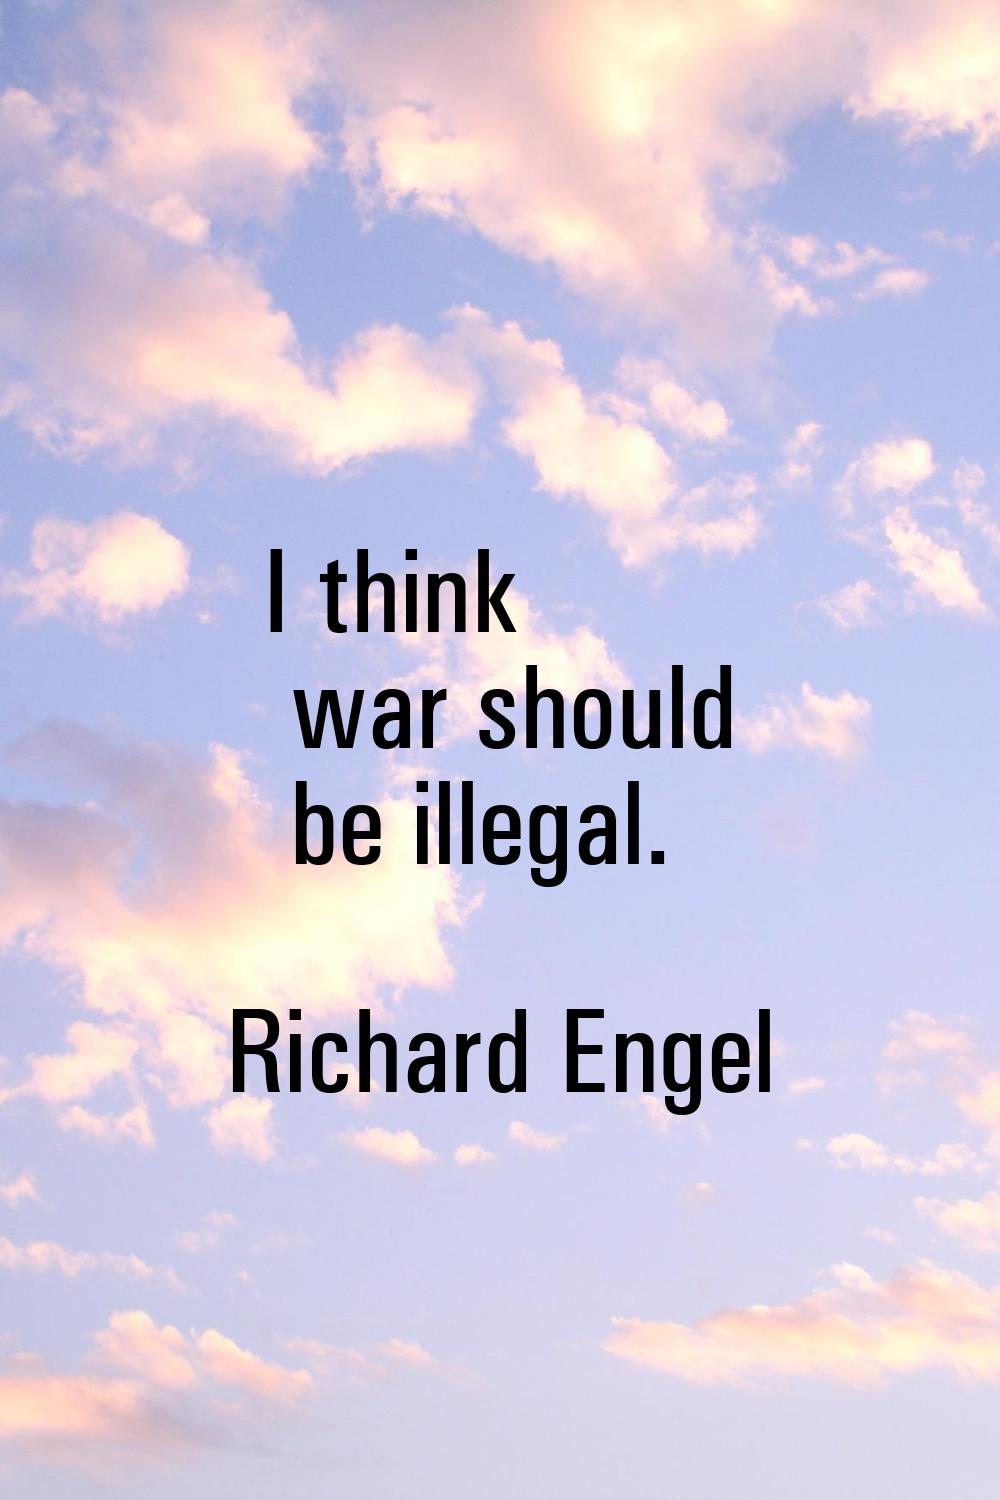 I think war should be illegal.